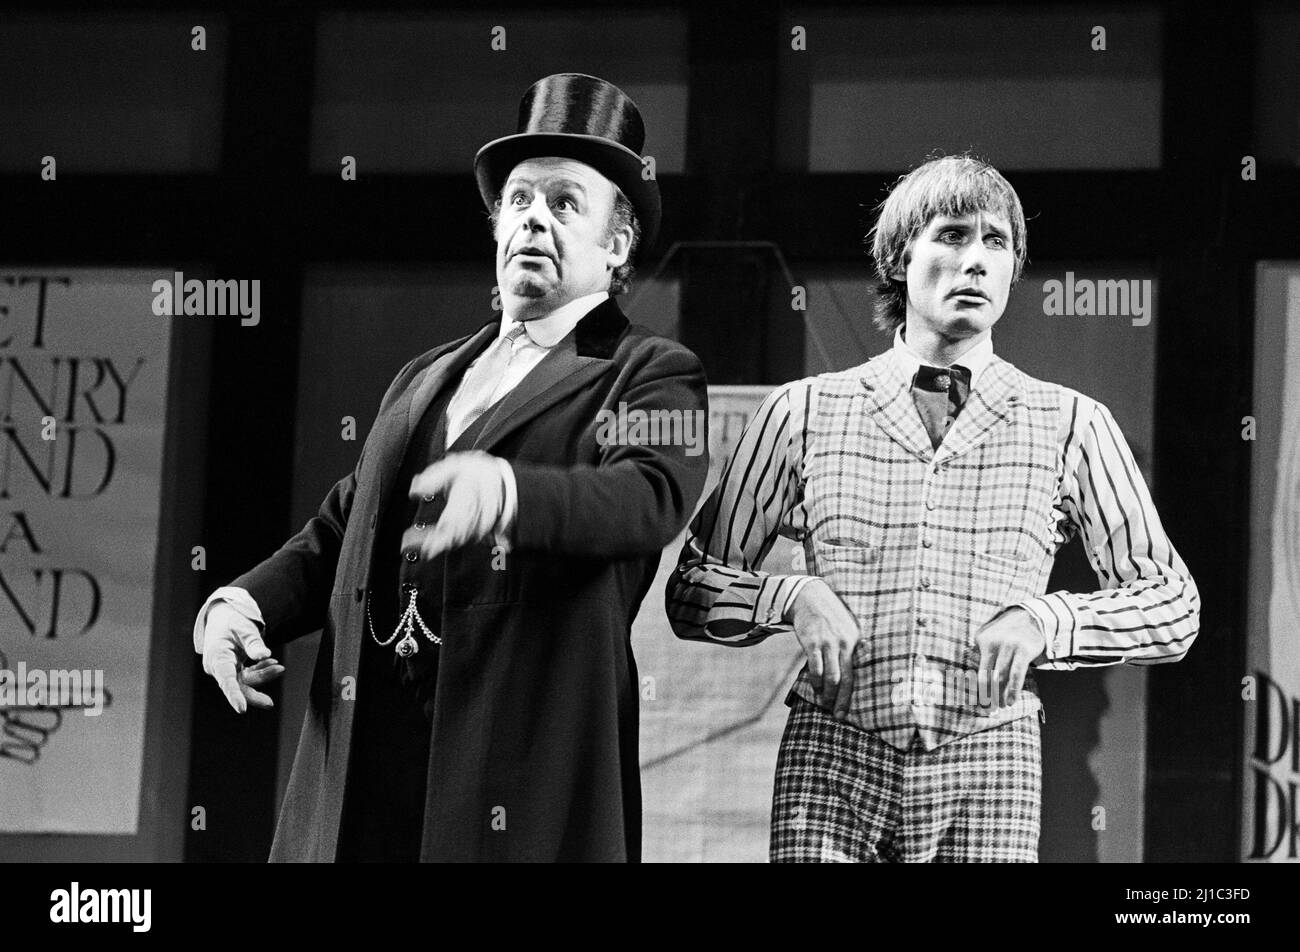 l-r: John Savident (Mr Duncalf), Jim Dale (Denry Machin) in THE CARD at the Queen’s Theatre, London W1  24/07/1973  music & lyrics: Tony Hatch & Jackie Trent  book: Keith Waterhouse & Willis Hall  after the novel by Arnold Bennett  design: Malcolm Pride  musical staging & choreography: Gillian Lynne  director: Val May Stock Photo